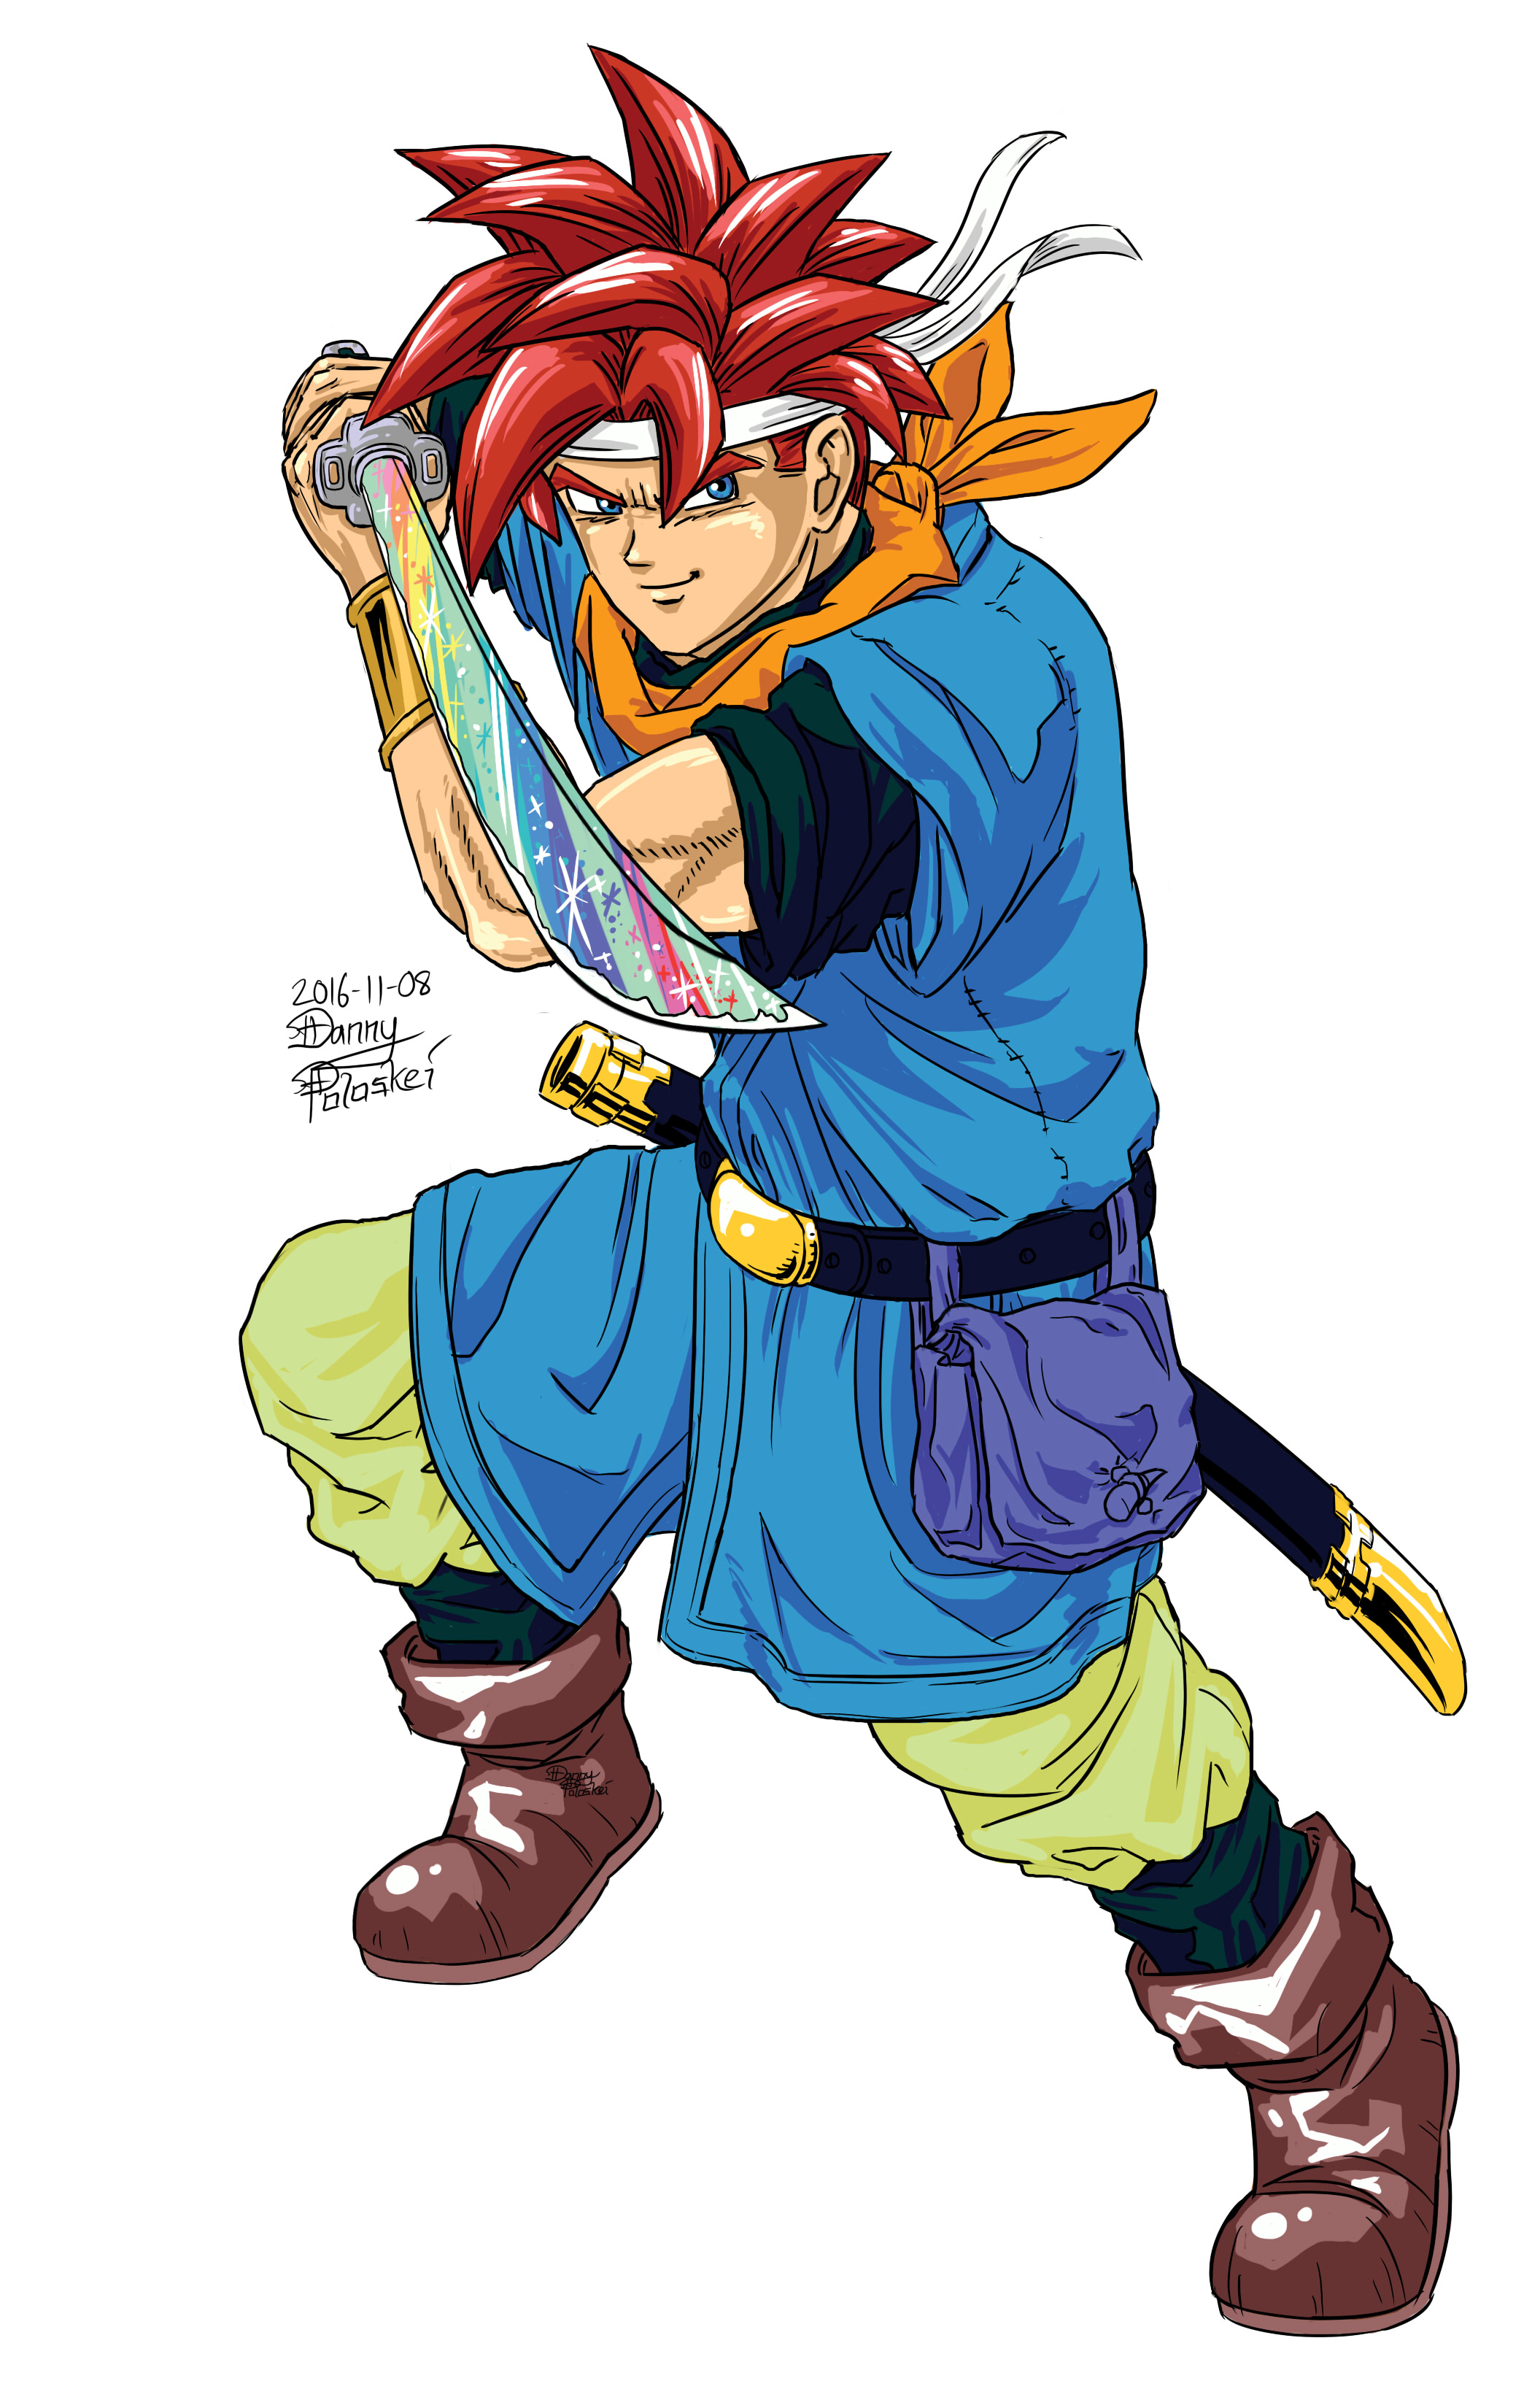 Crono with Rainbow Sword from Chrono Trigger by Danny Poloskei